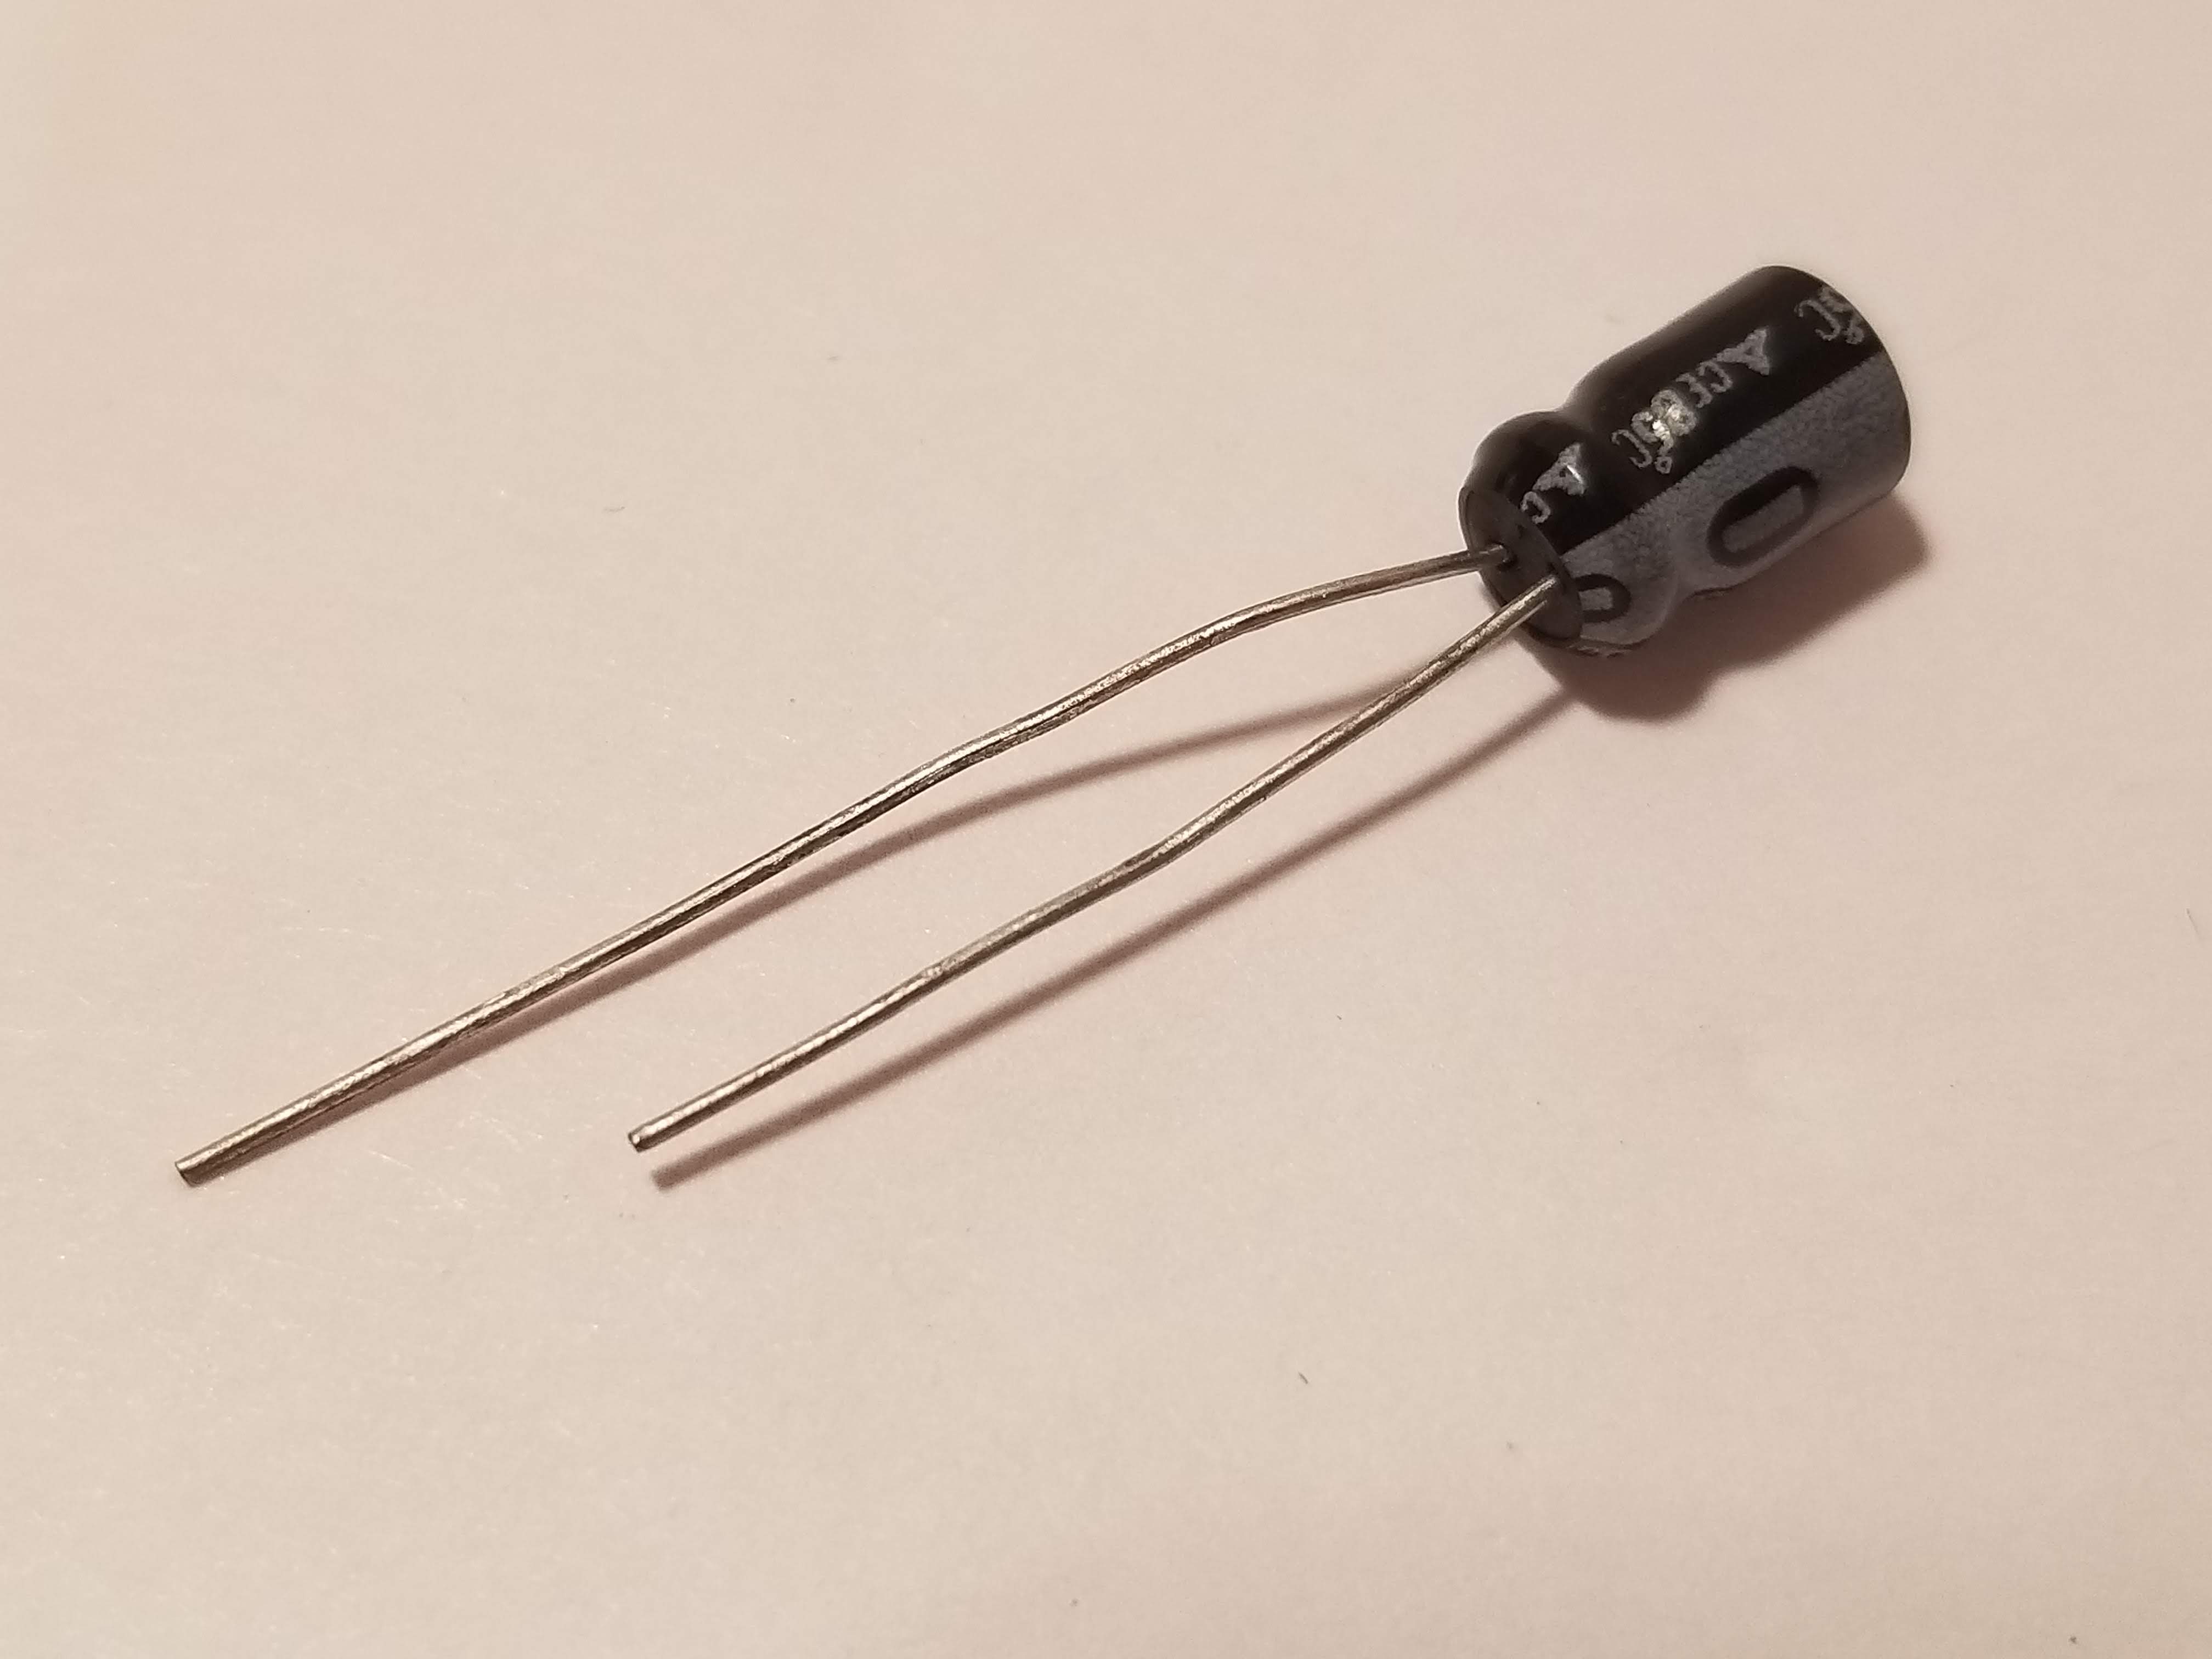 Picture of 2.2uF Electrolytic Capacitor